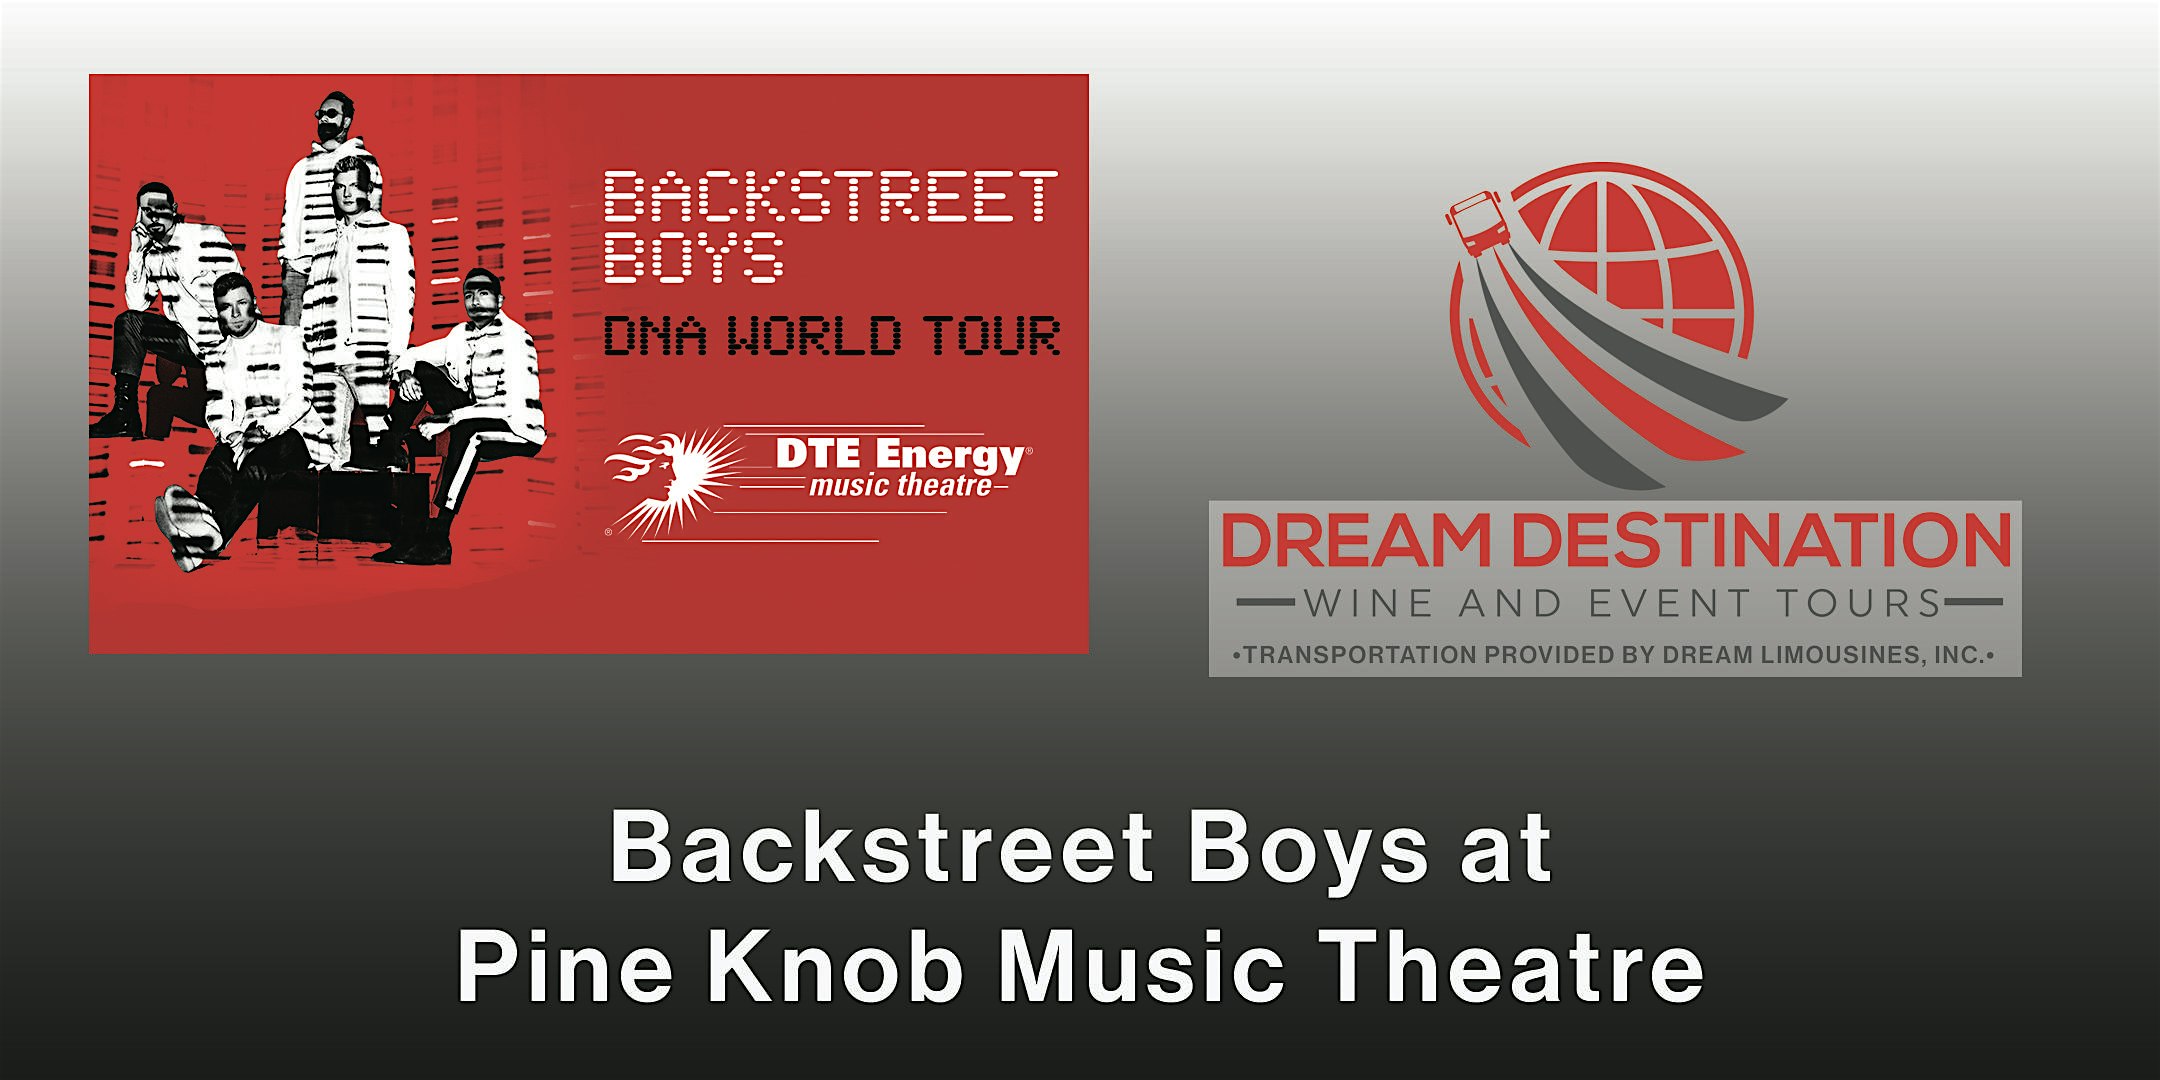 Shuttle Bus to See Backstreet Boys at Pine Knob Music Theatre